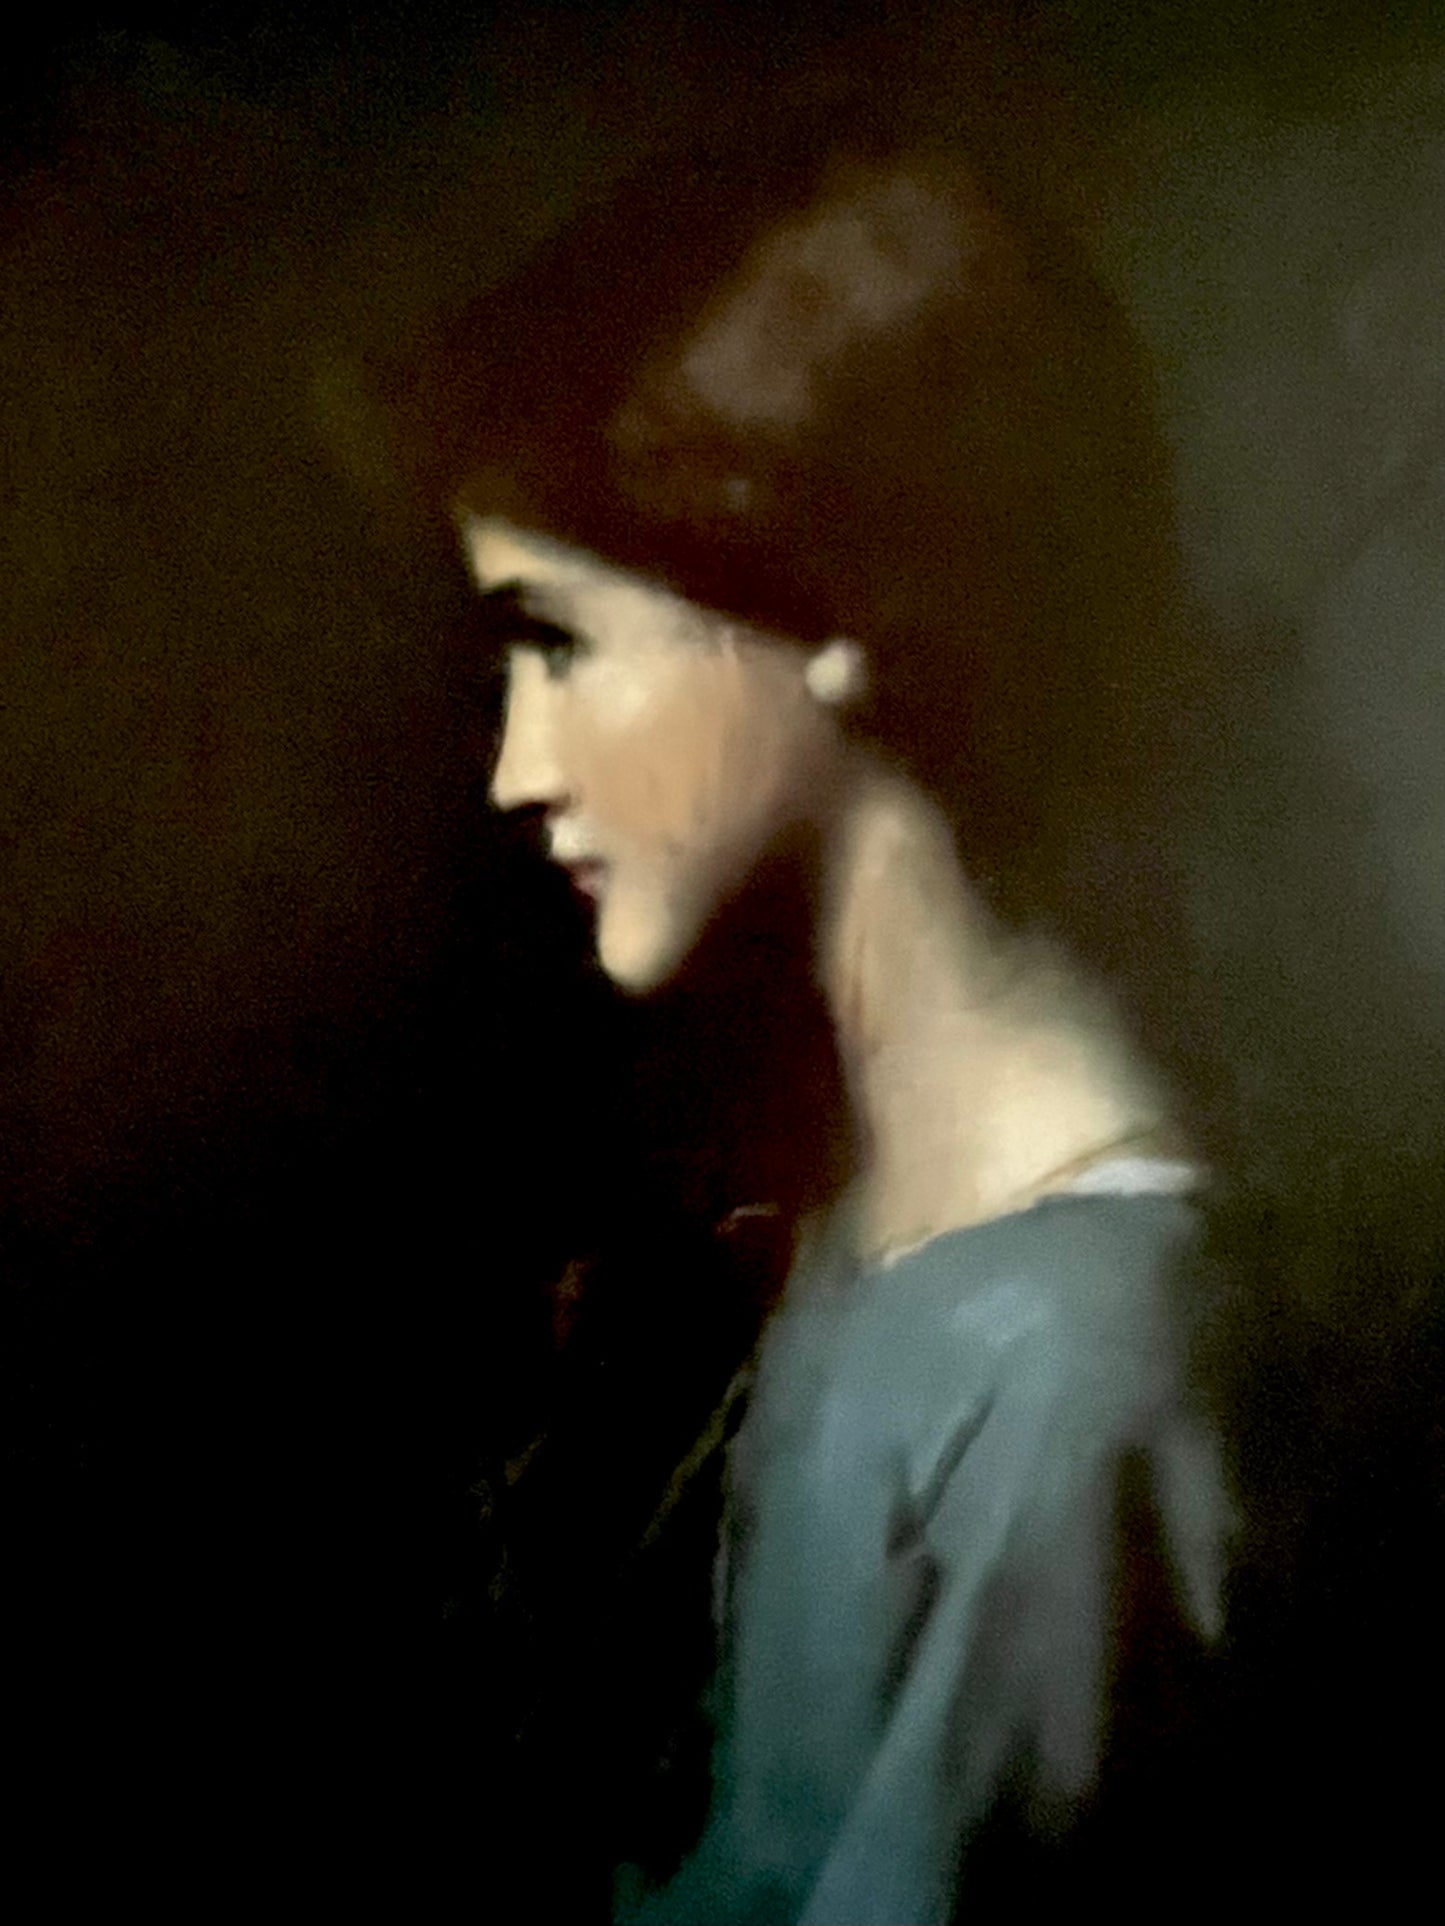 "The Young Shepherdess" Vintage Art Print by Jean-Jacques Henner